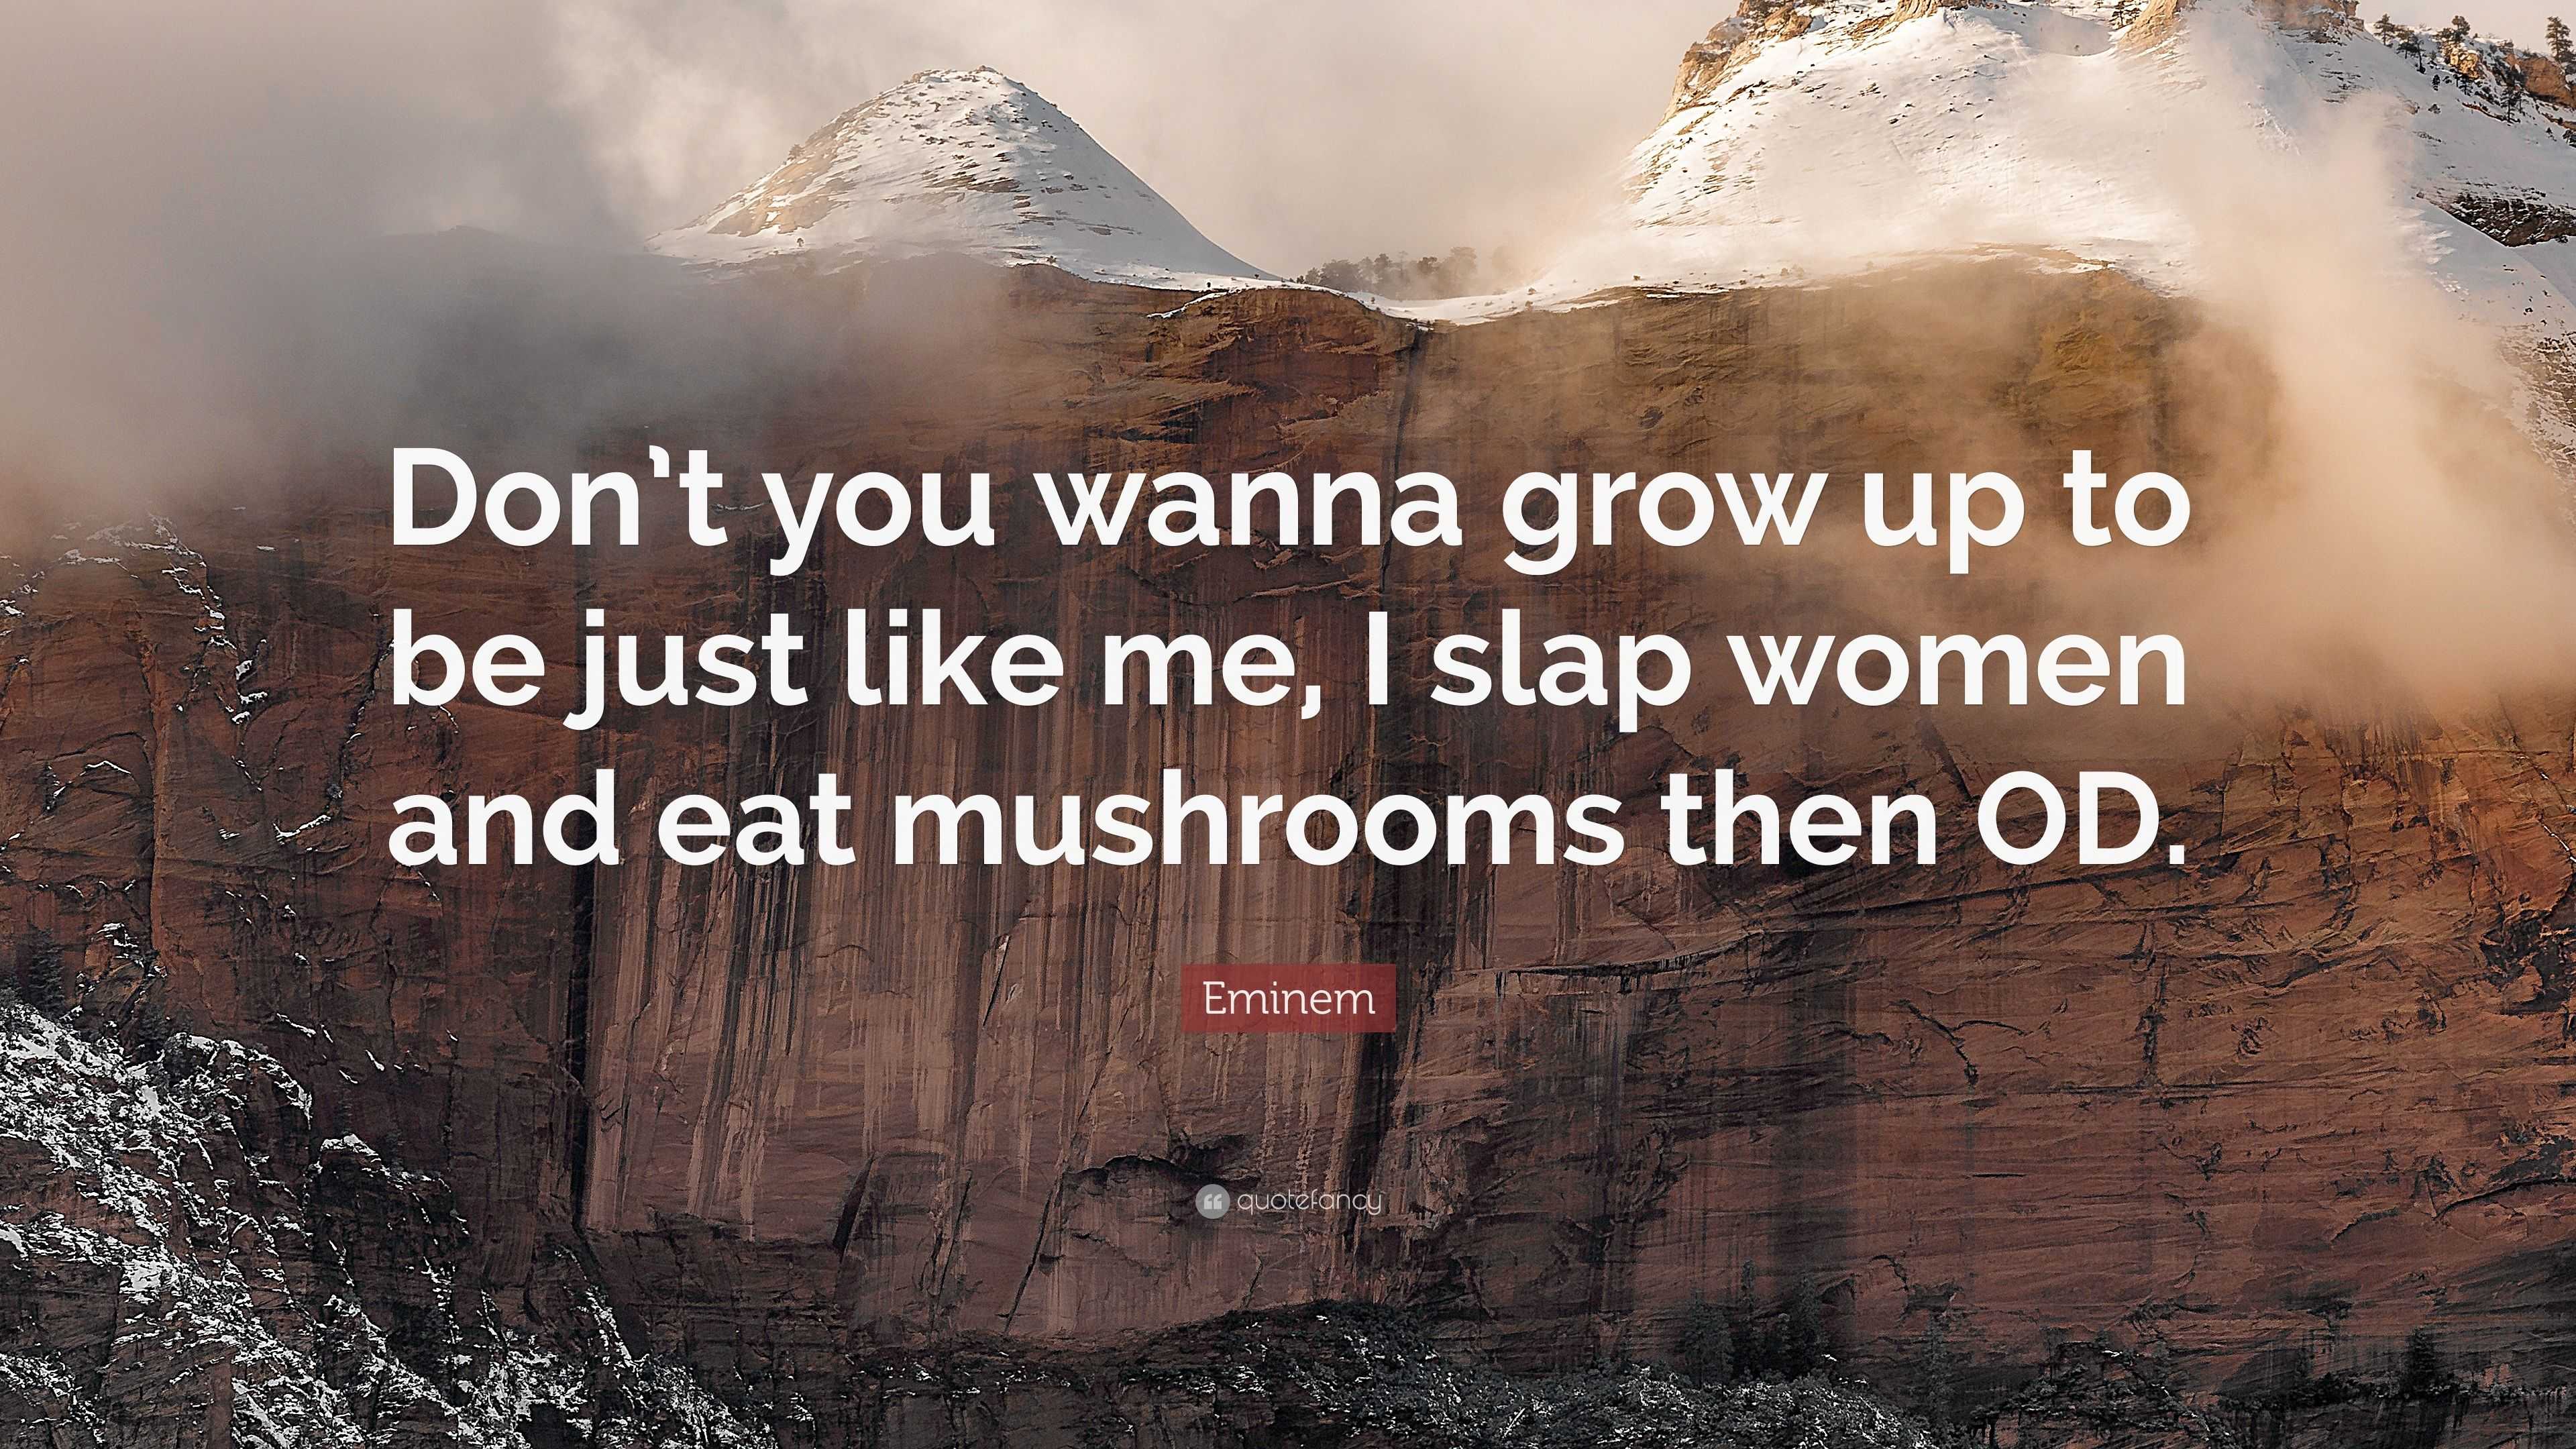 Eminem Quote “Don t you wanna grow up to be just like me